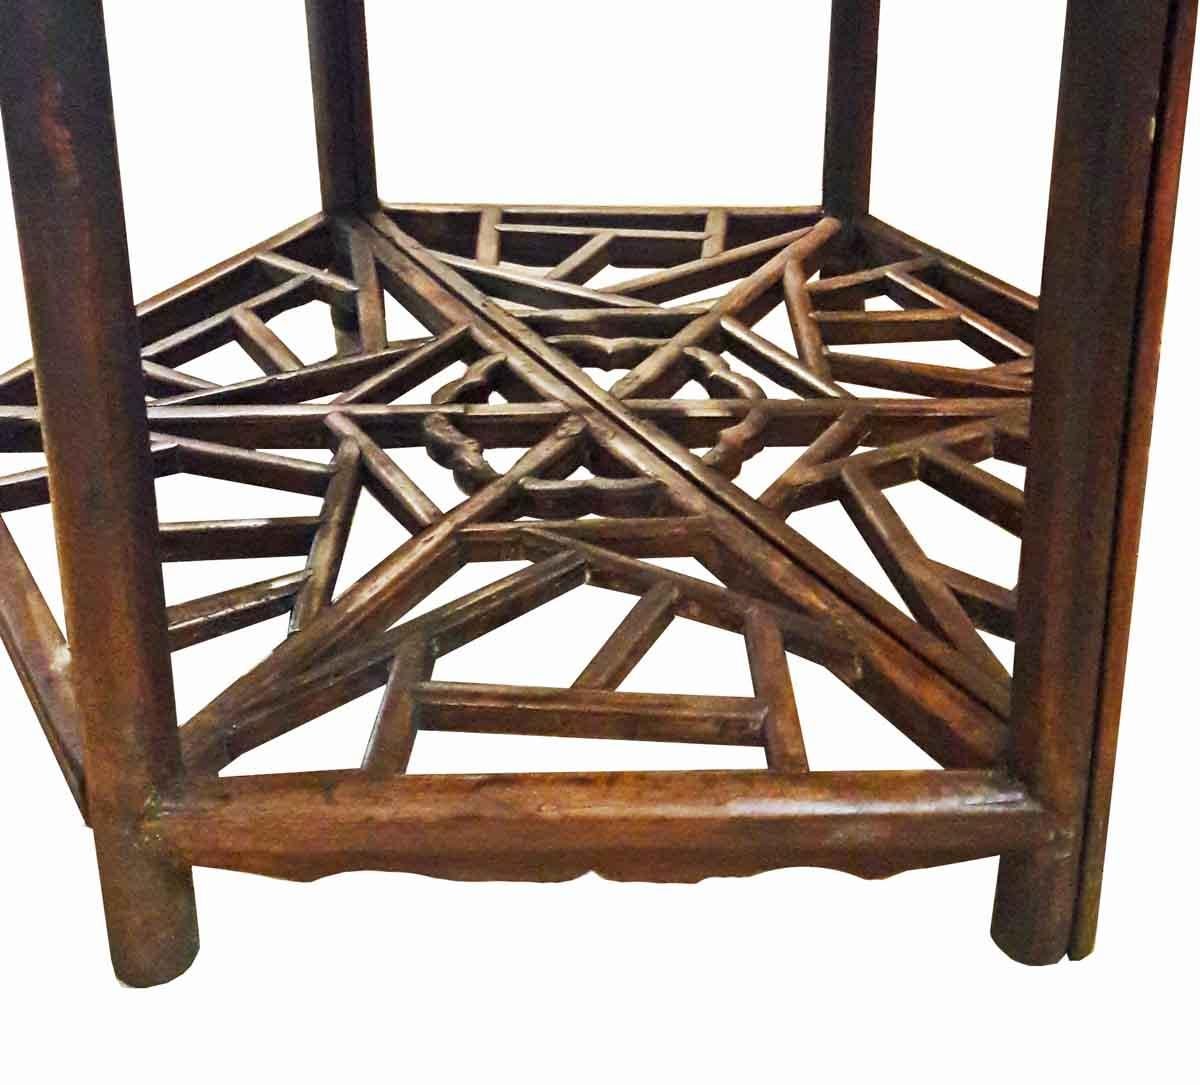 Qing Cypresswood Demi-Lune Tables, Suzhou, Early 19th Century